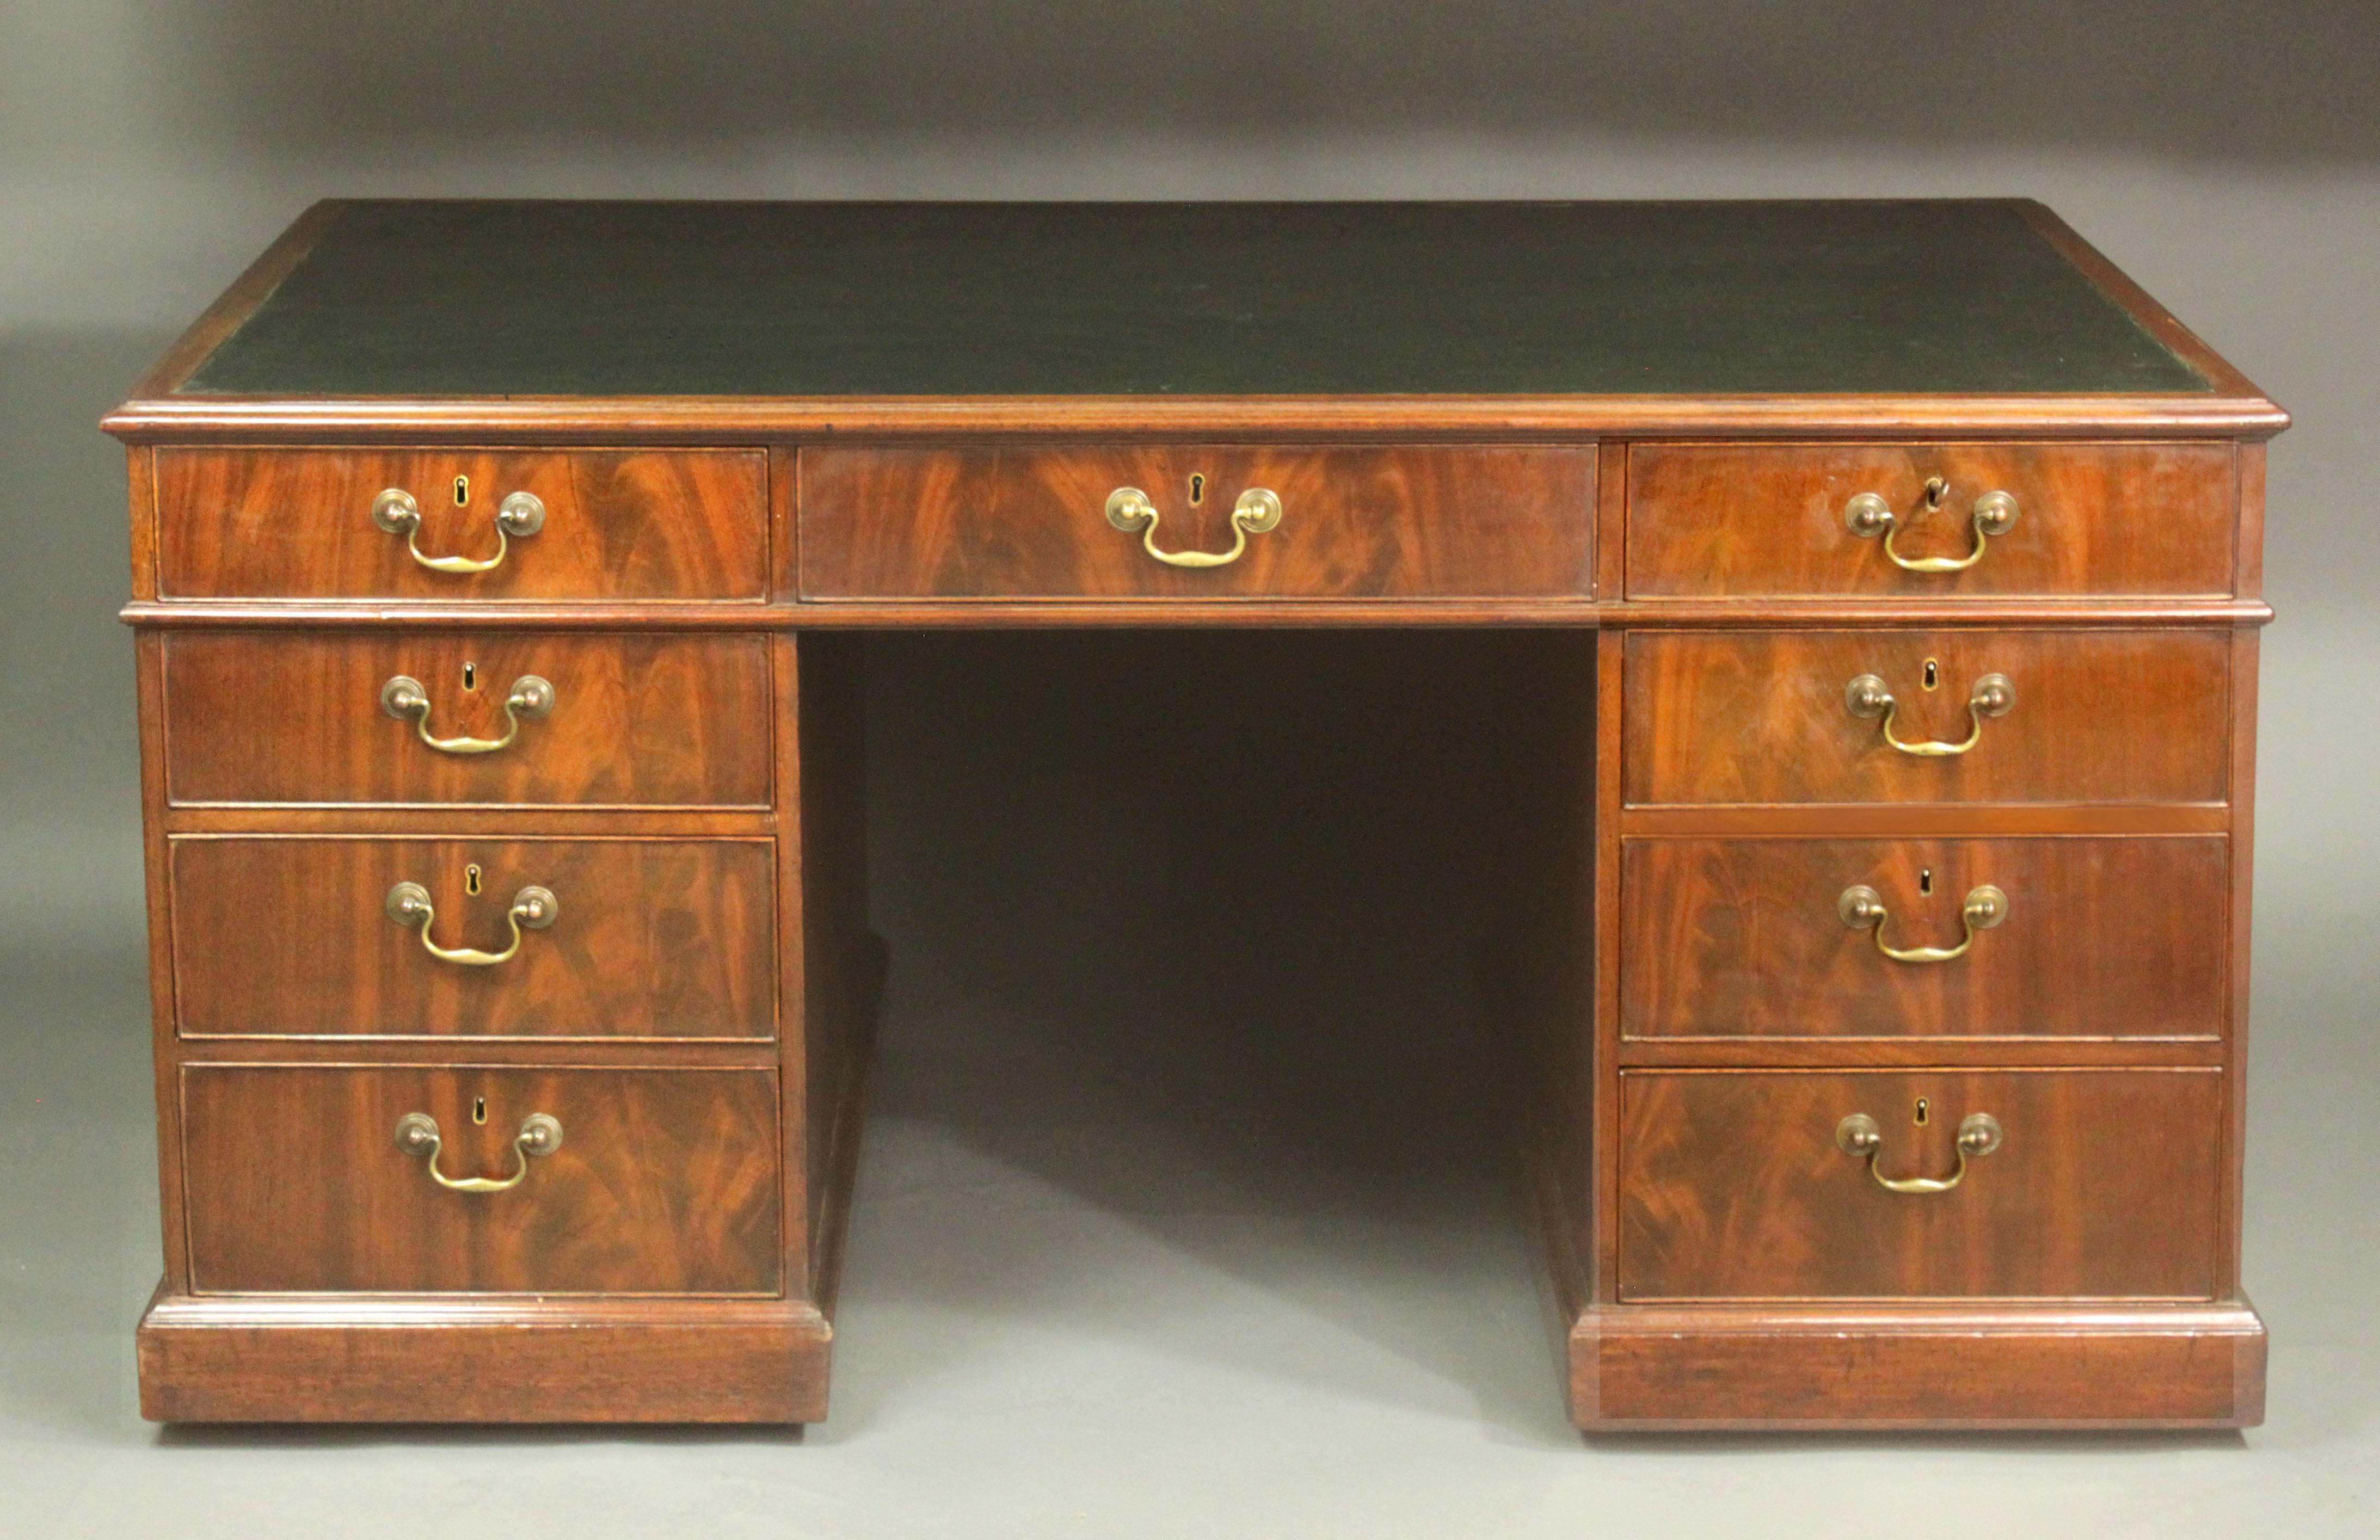 A rare George III partners desk of a good nut-brown colour and patina, drawers on the front and back (no cupboards), the cock-beaded drawer fronts attractively veneered in one continous sheet of figured mahogany, cedar lined drawers and many of the